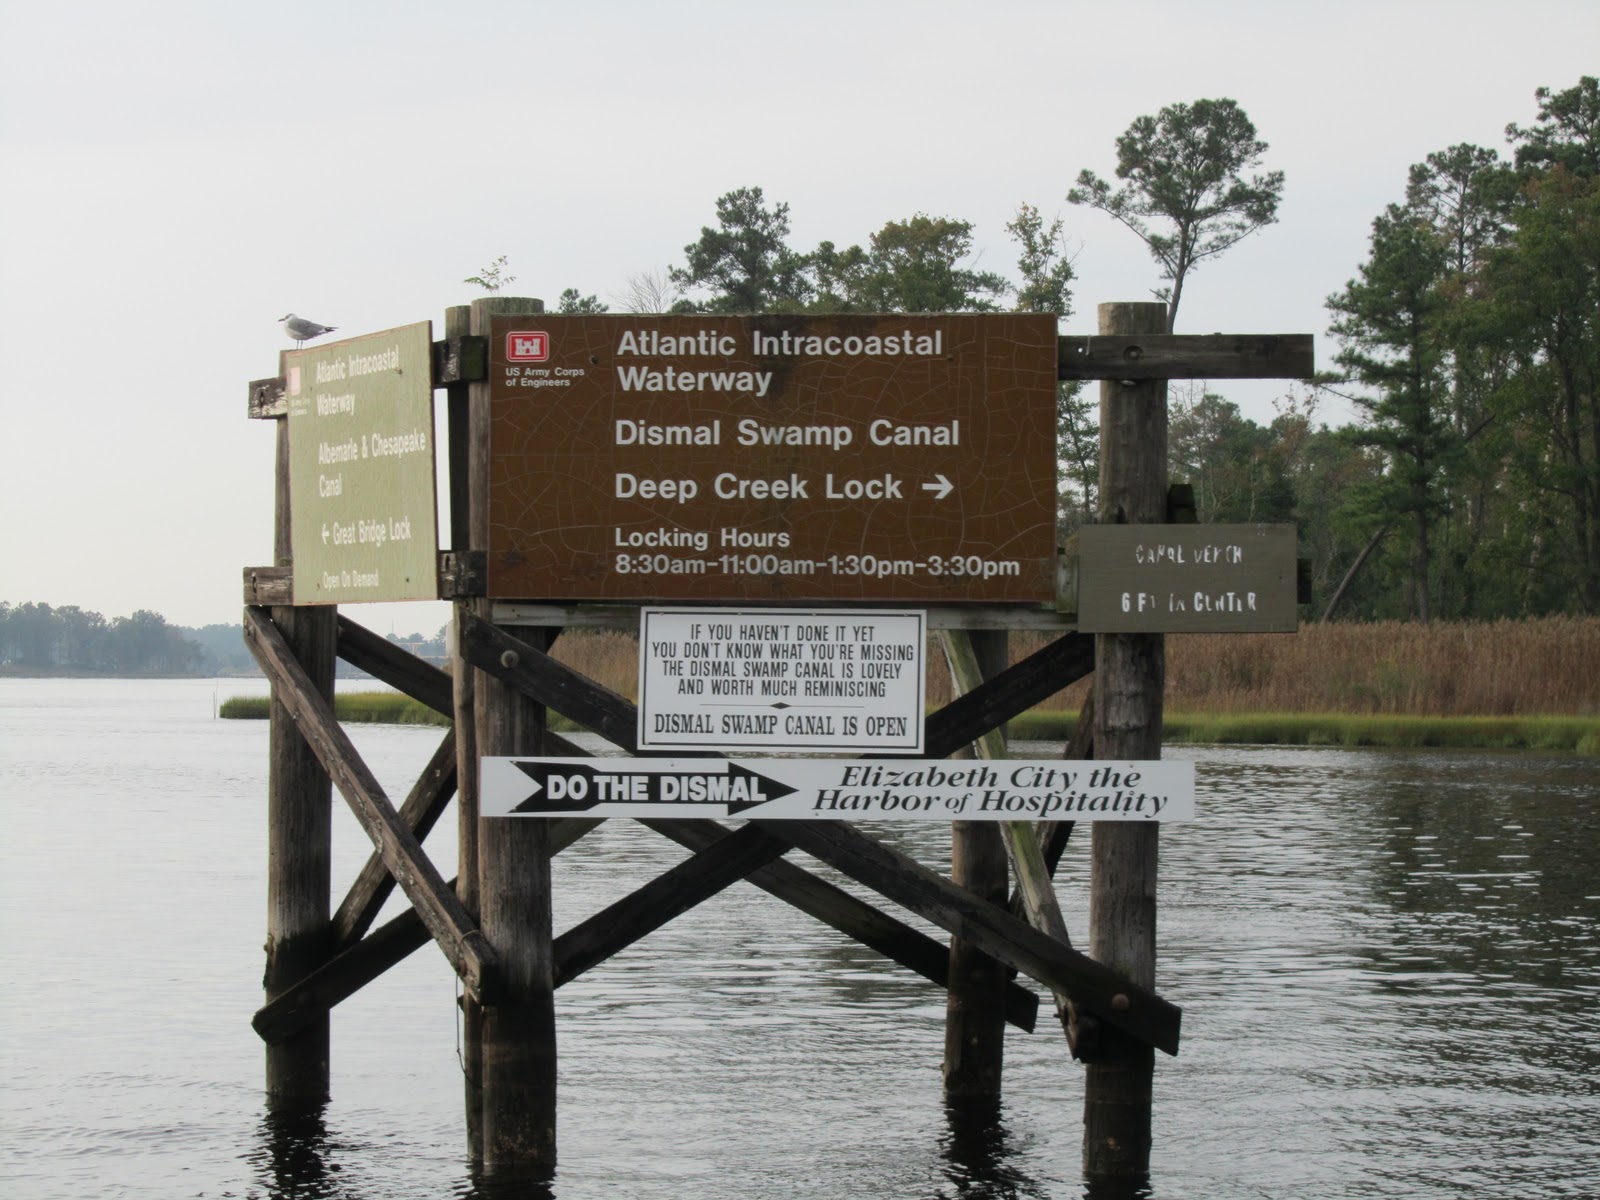 Cape Cod to Key West: The Great Dismal Swamp